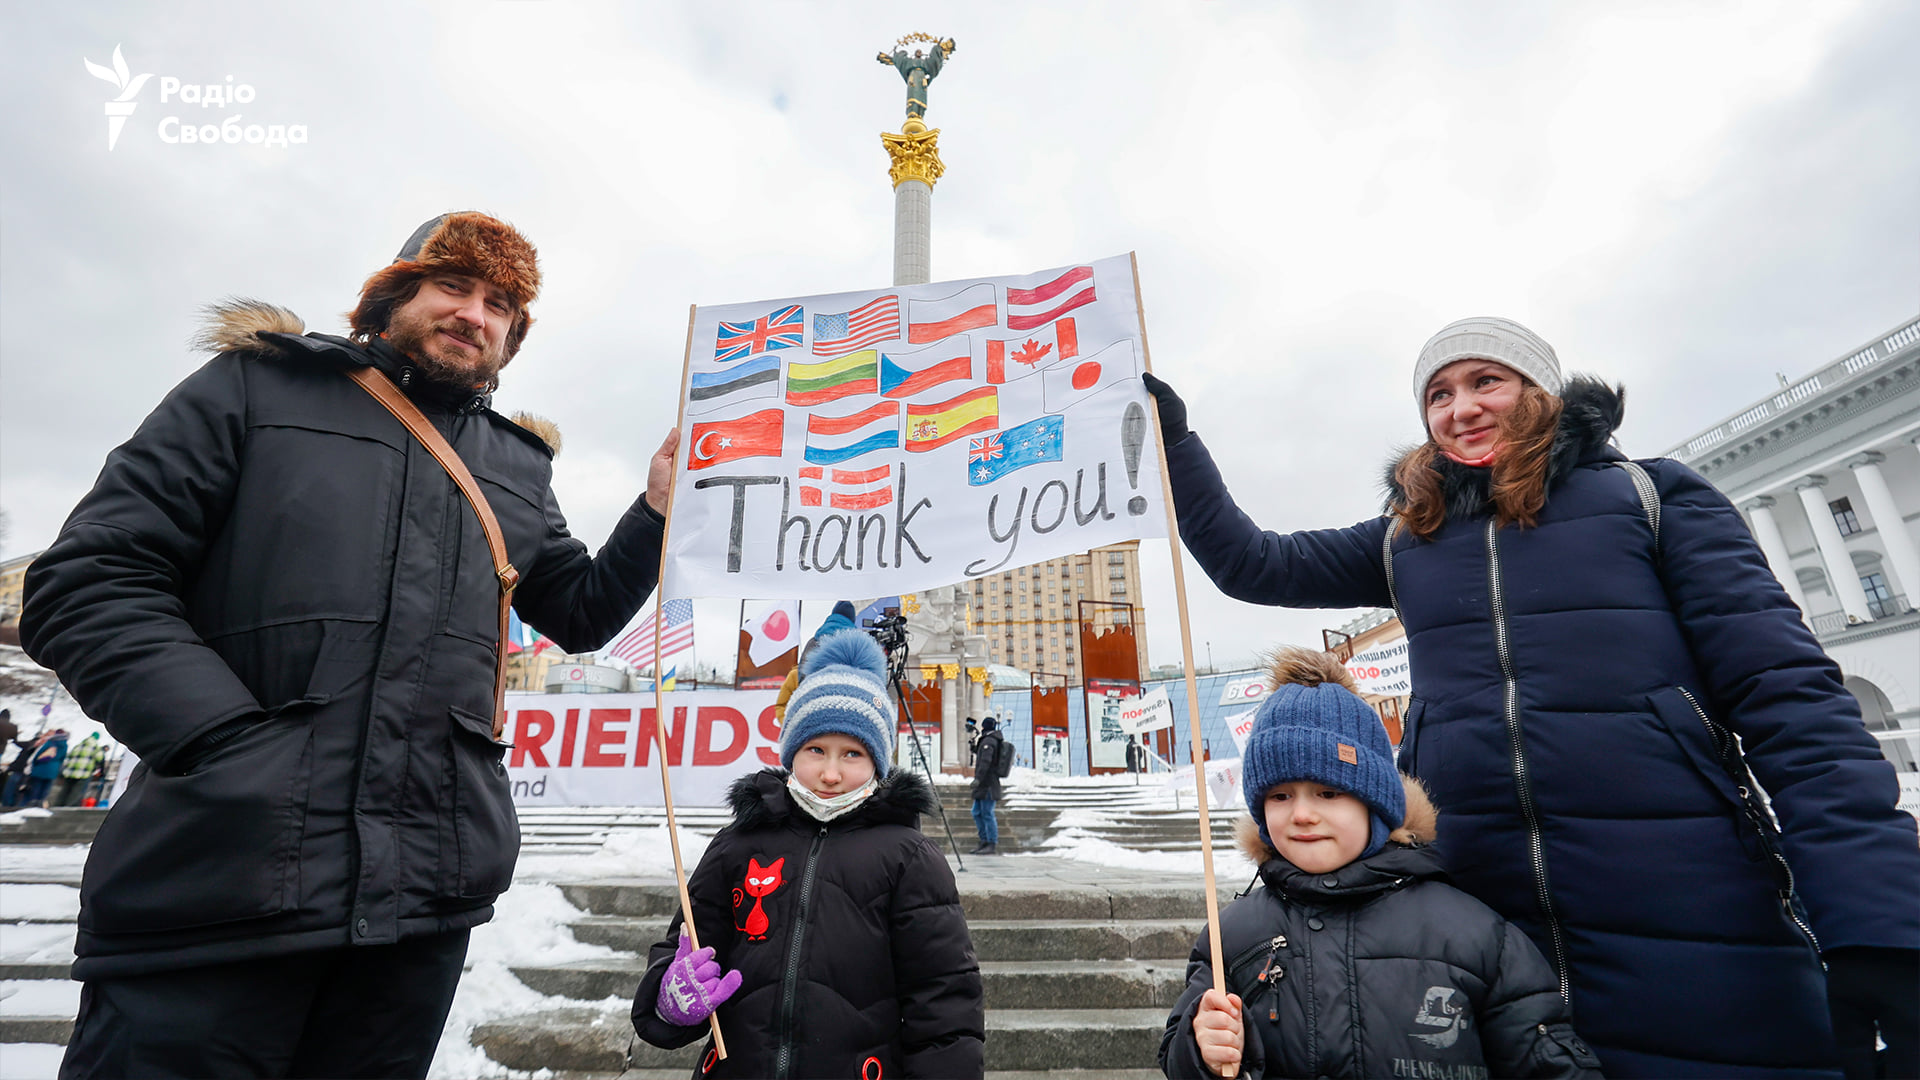 Ukrainians in Kyiv take part in #ThanksFriends action to show appreciation to Ukraine's partners providing the country with military aid